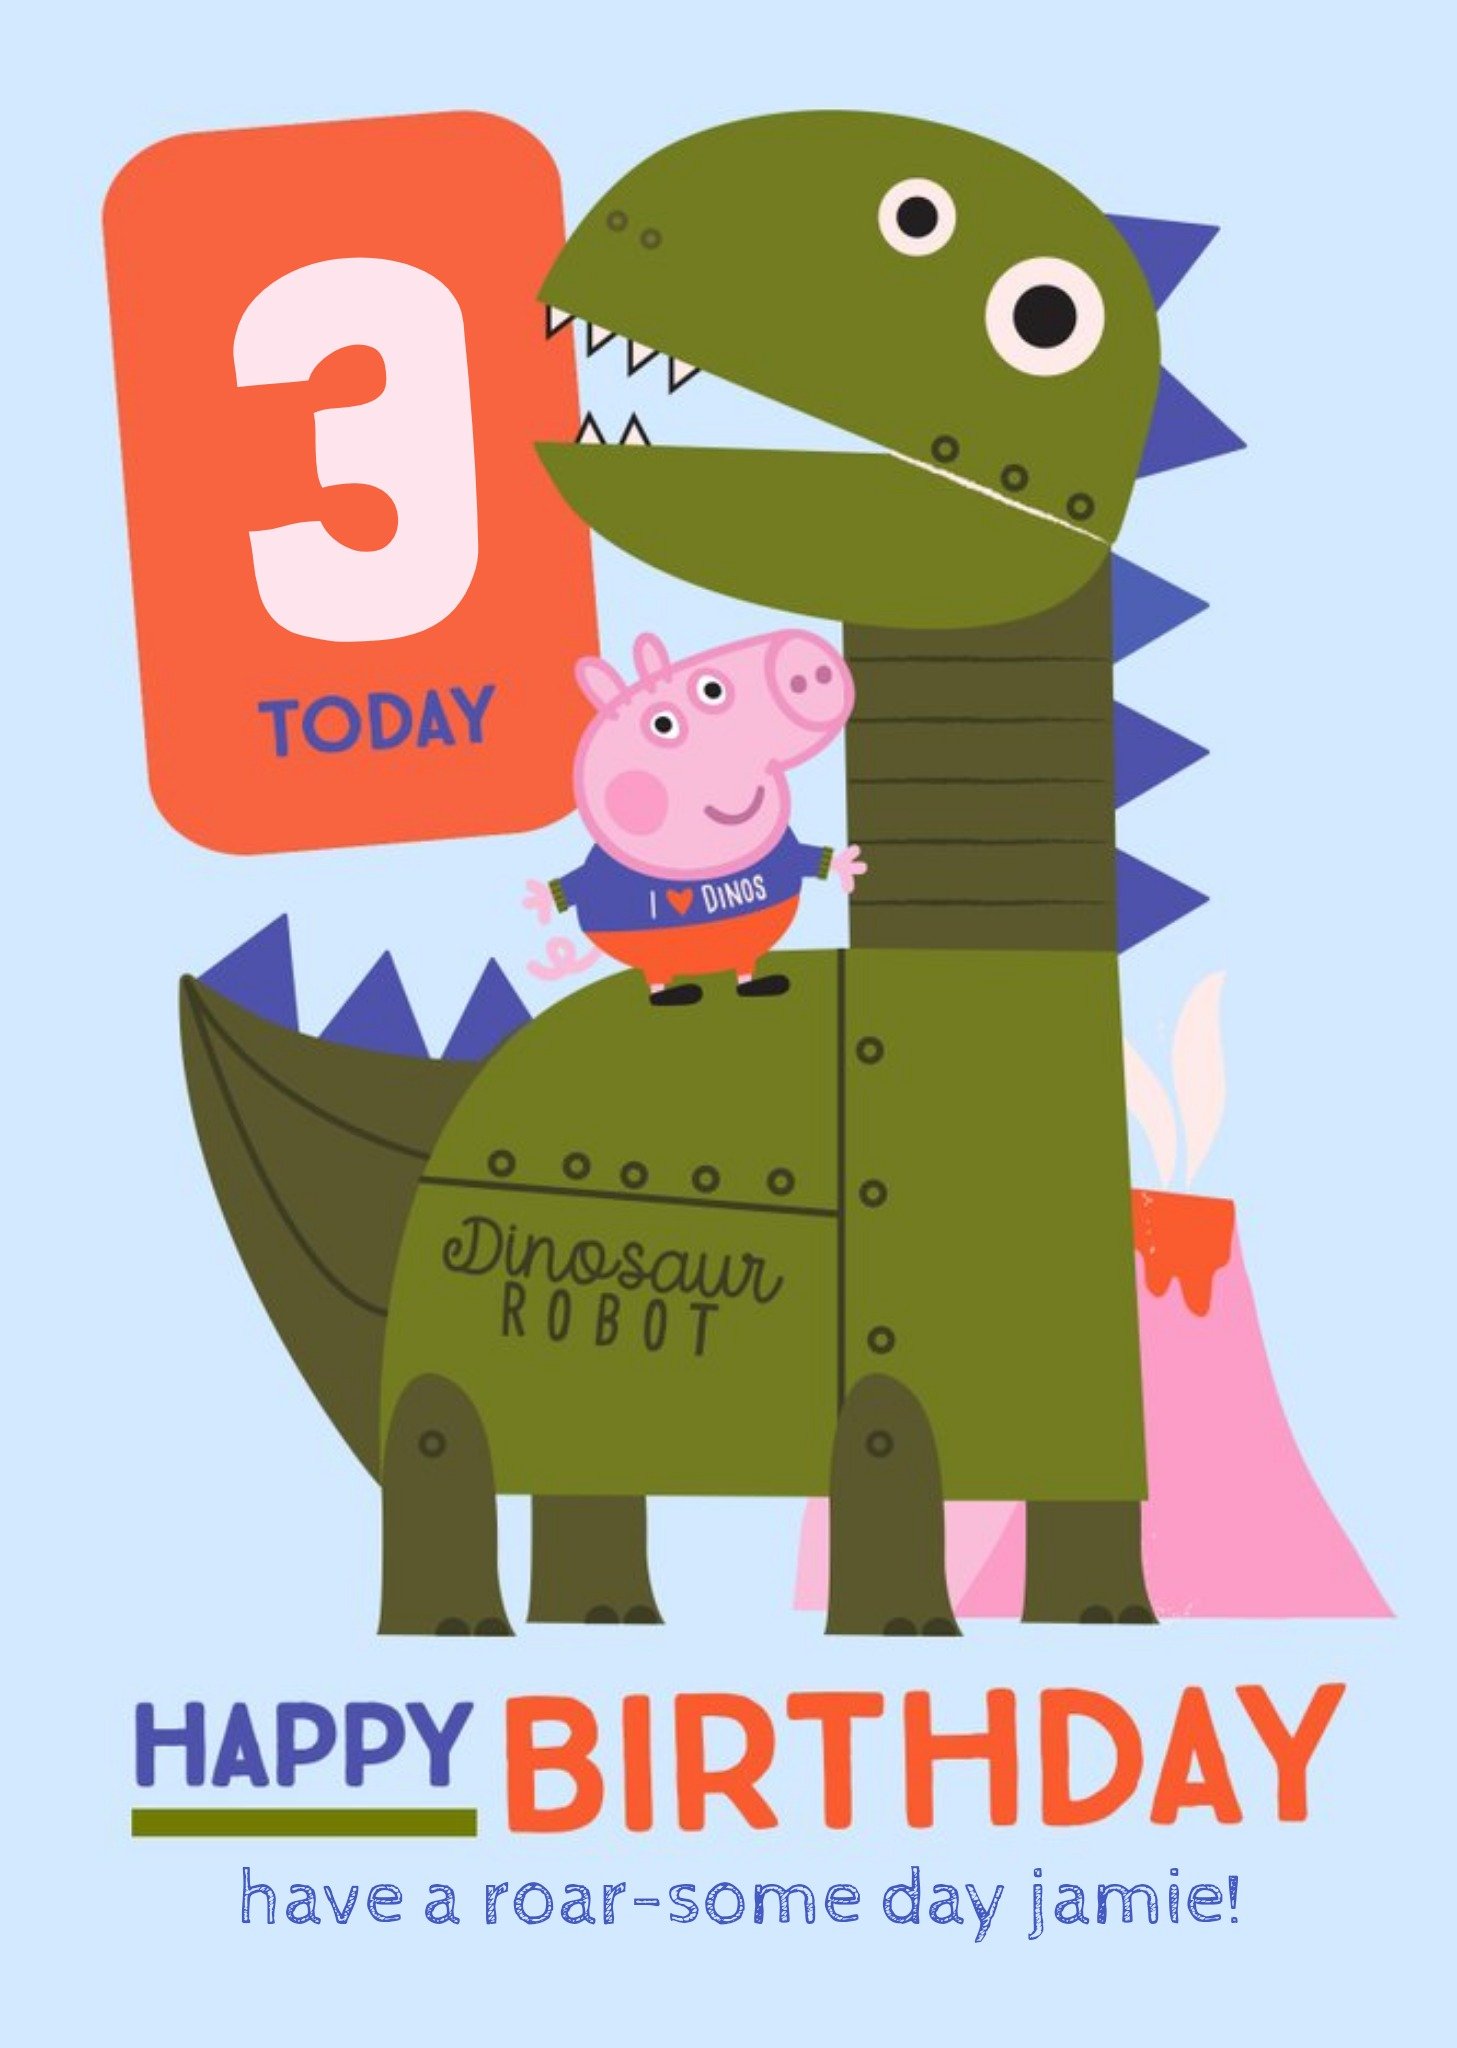 Peppa Pig And George Pig Dinosaur Robot 3 Today Roarsome Birthday Card, Large